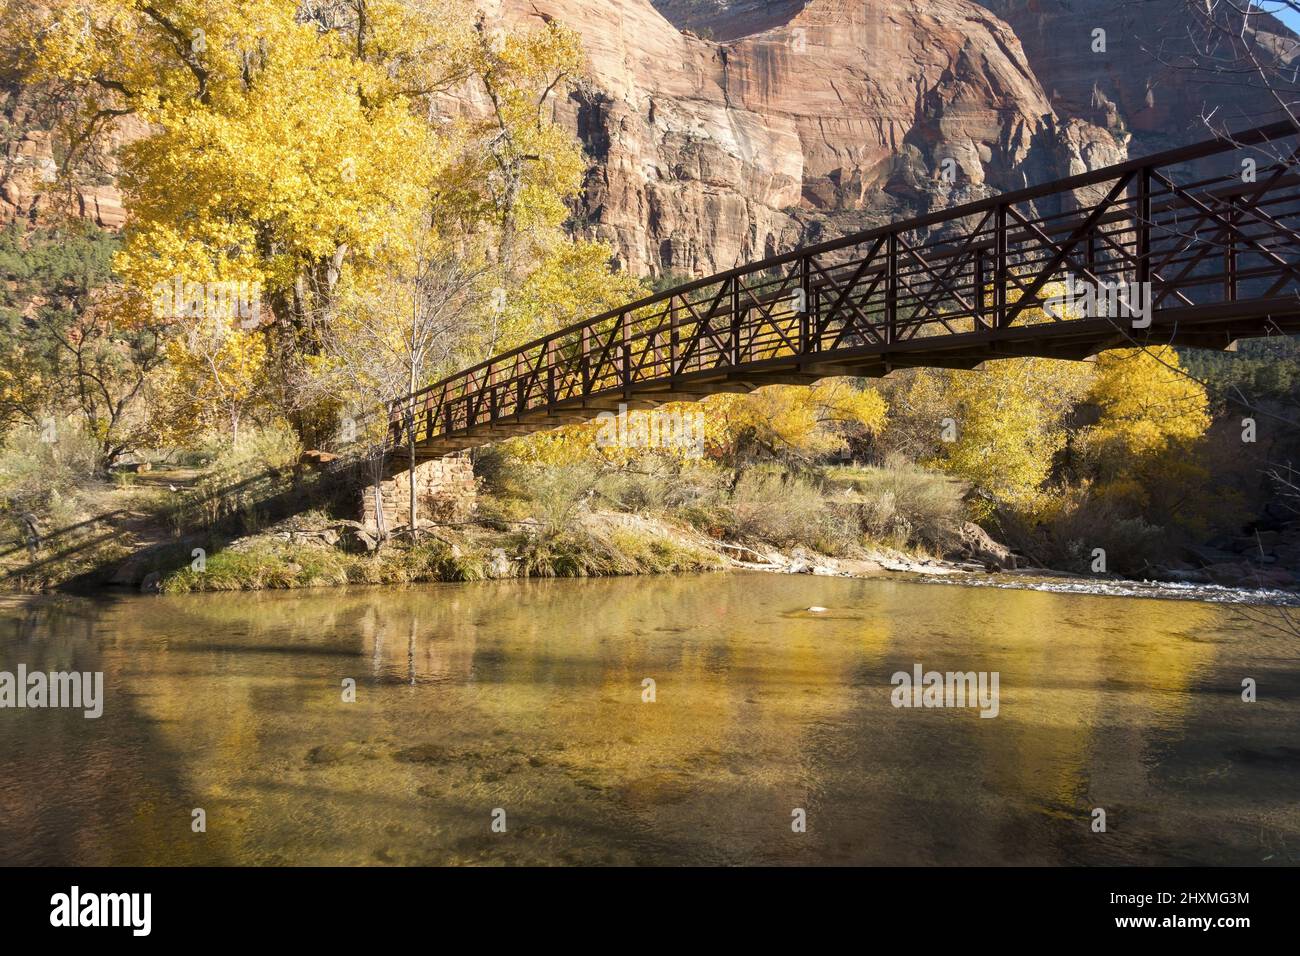 Pedestrian and Equestrian Footbridge over Virgin River Canyon with Autumn Foliage Yellow Leafs Landscape. Scenic Hiking Zion National Park, Utah USA Stock Photo